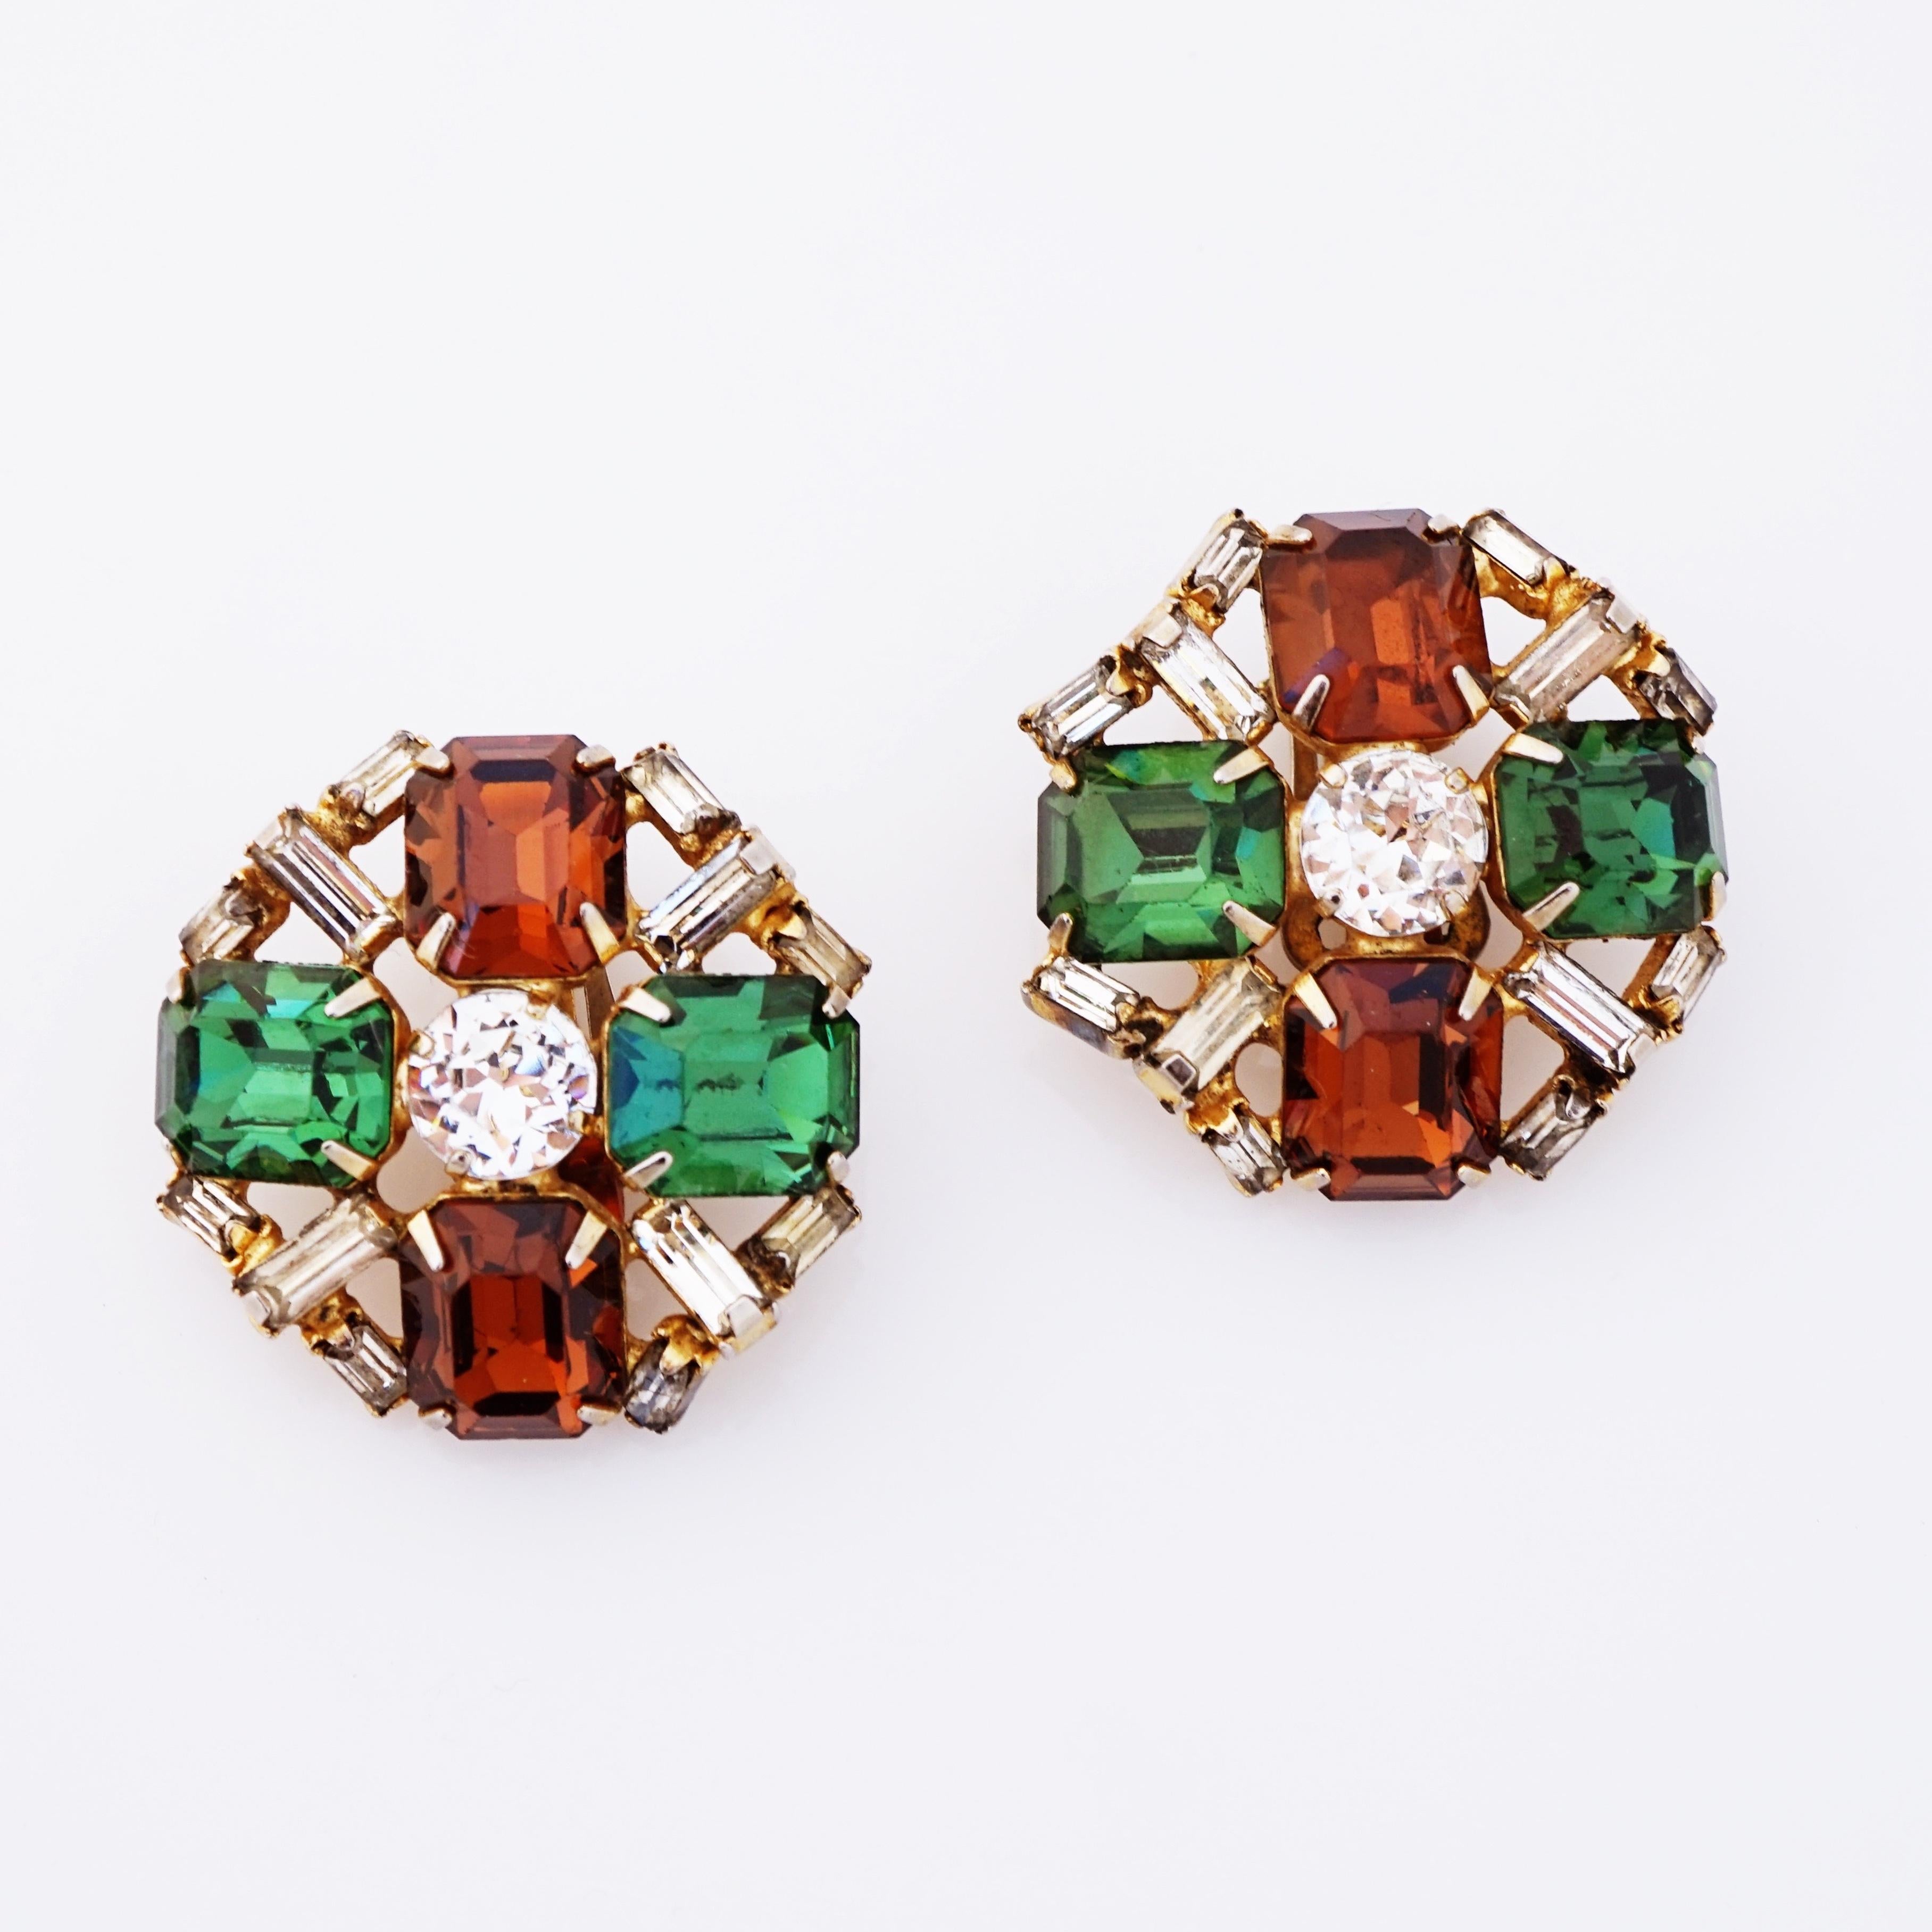 Modern Smoked Topaz and Emerald Rhinestone Crystal Statement Earrings By Hobé, 1960s For Sale